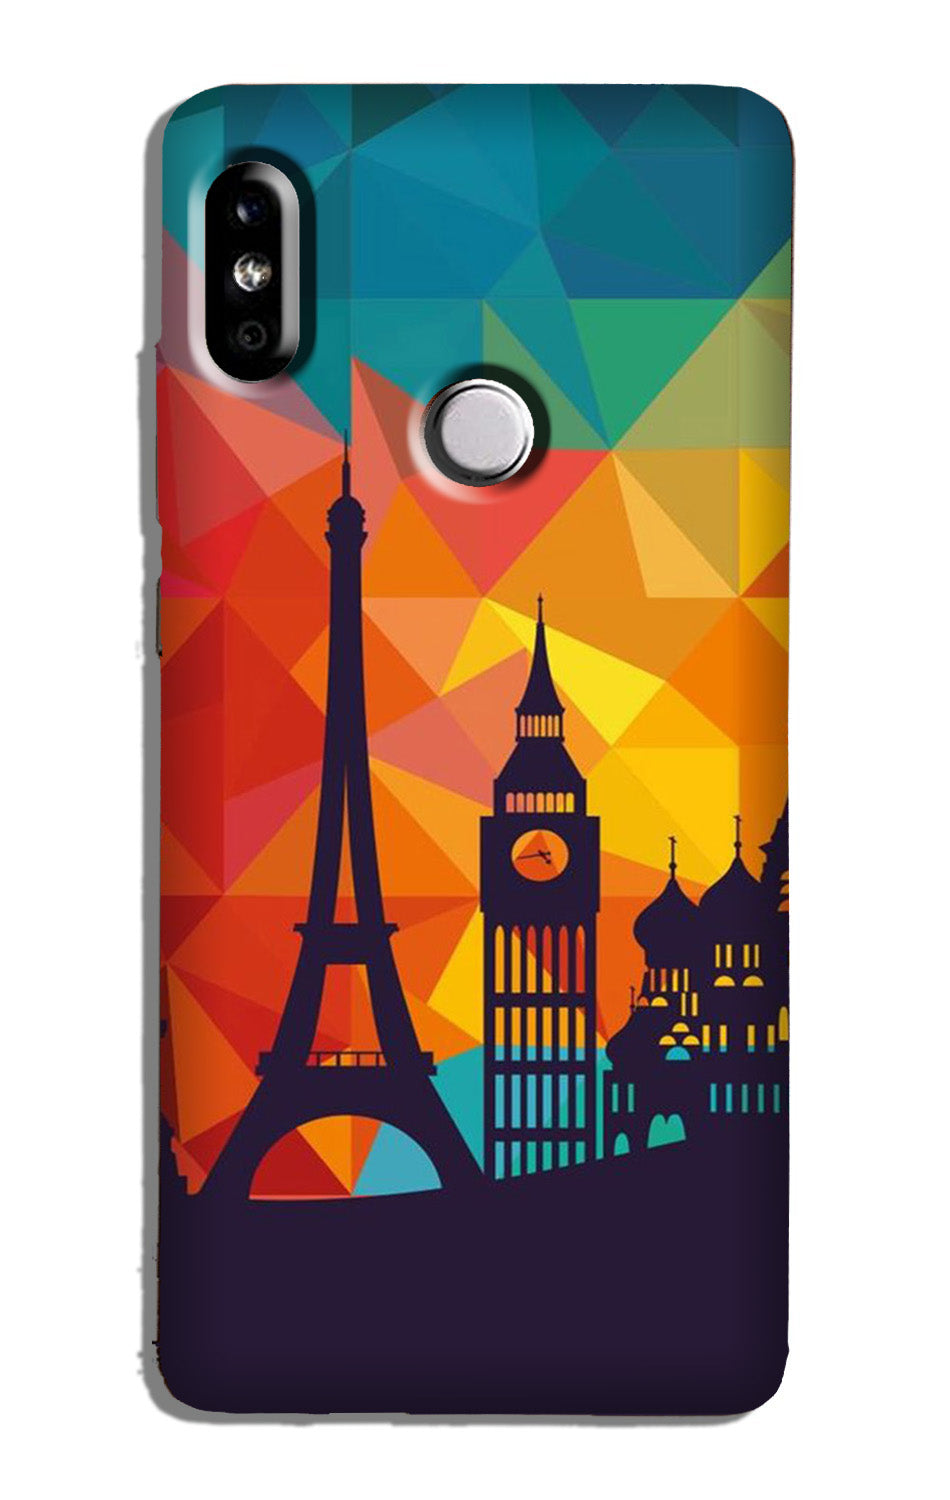 Eiffel Tower2 Case for Redmi Note 6 Pro